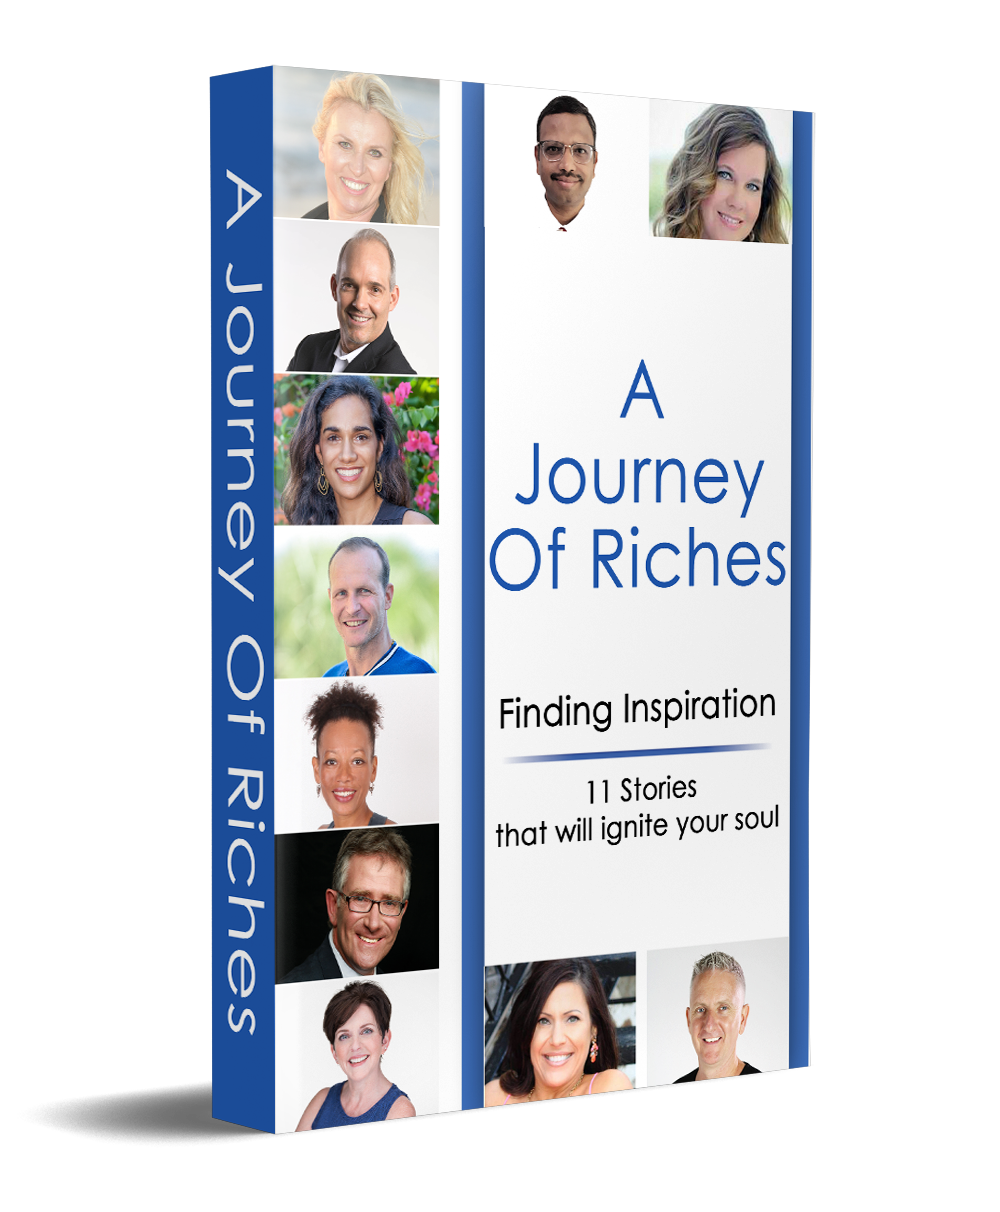 FREE: A Journey Of Riches: Finding Inspiration by John Spender